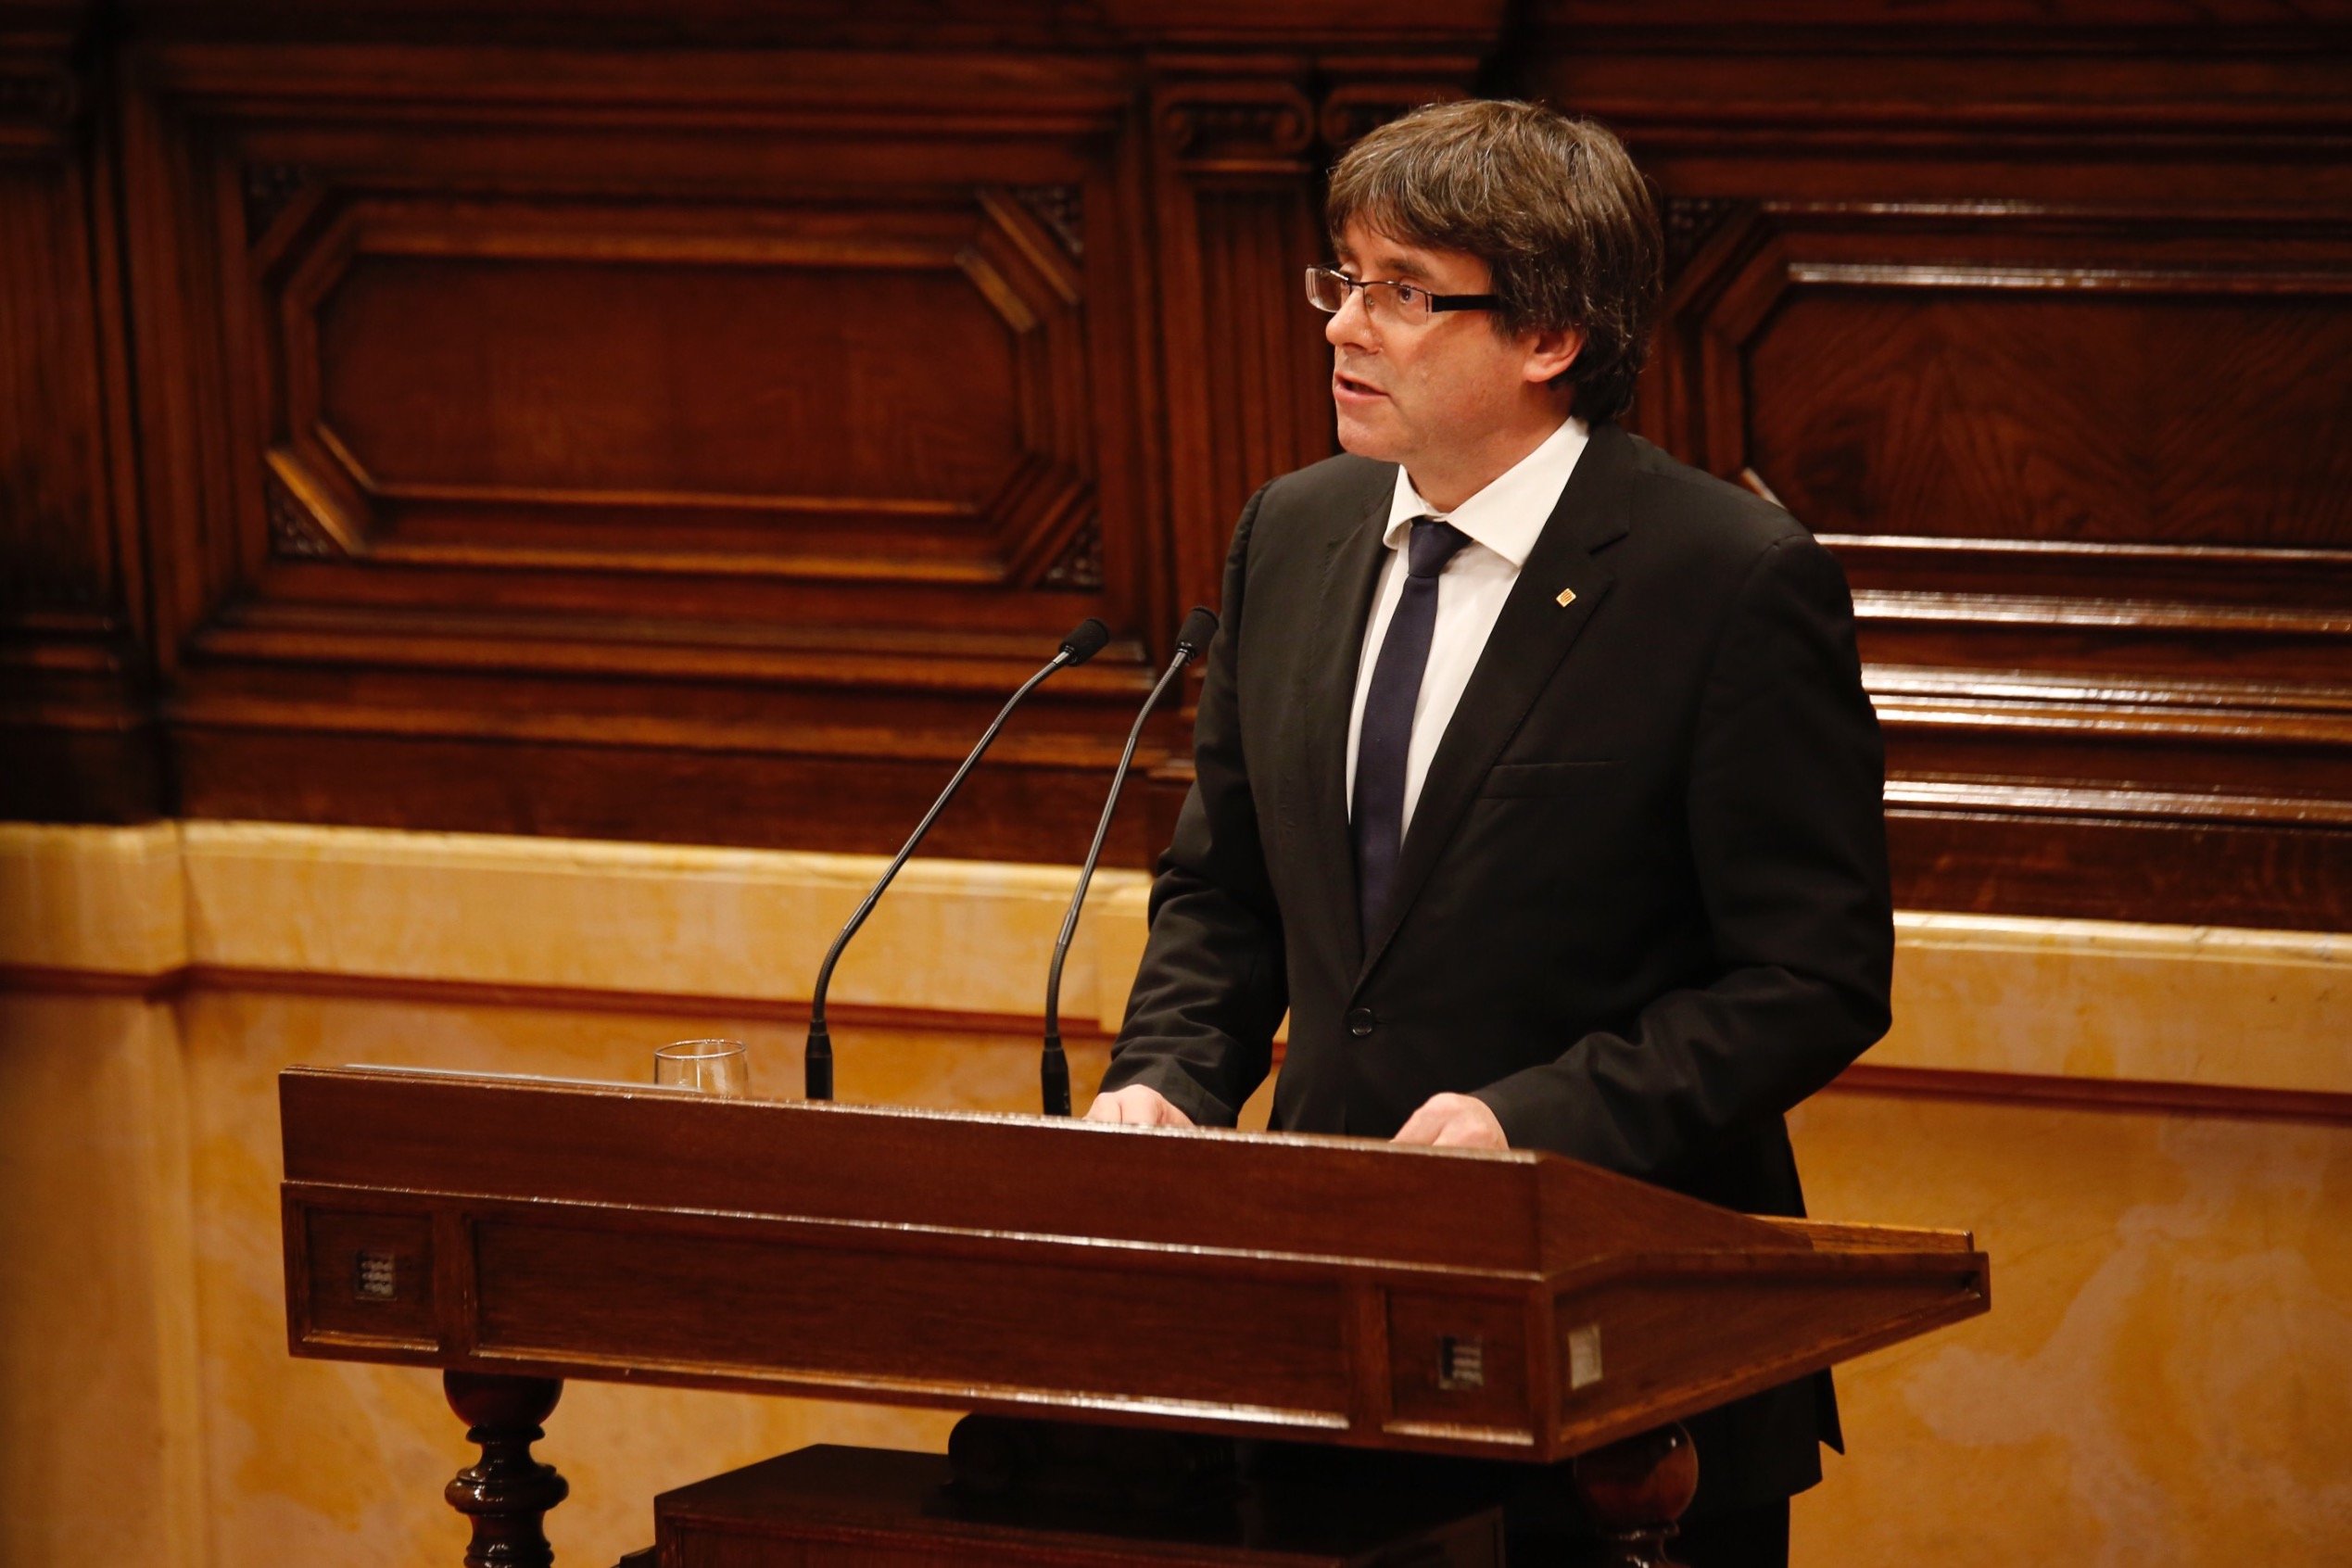 Puigdemont asks Rajoy for two months of dialogue